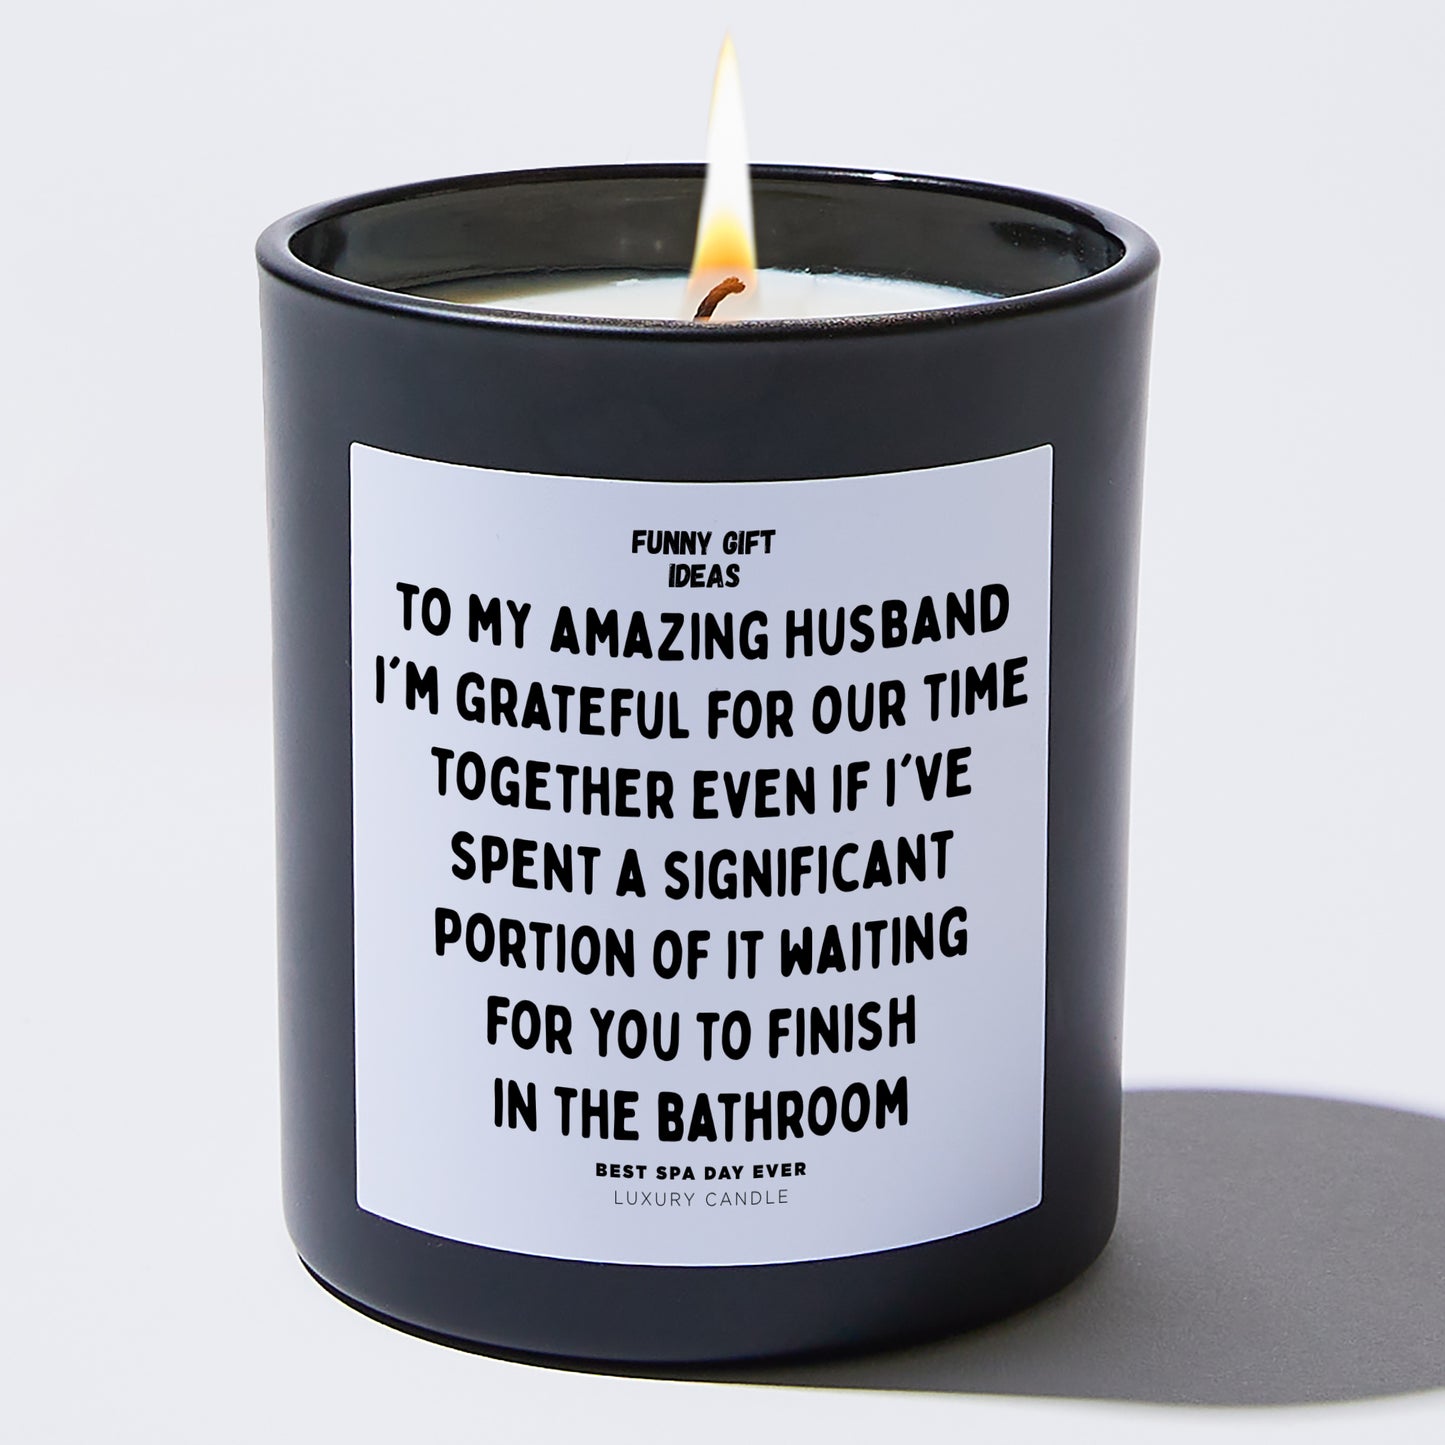 Anniversary Present - To My Amazing Husband, I'm Grateful for Our Time Together, Even if I've Spent a Significant Portion of It Waiting for You to Finish in the Bathroom - Candle